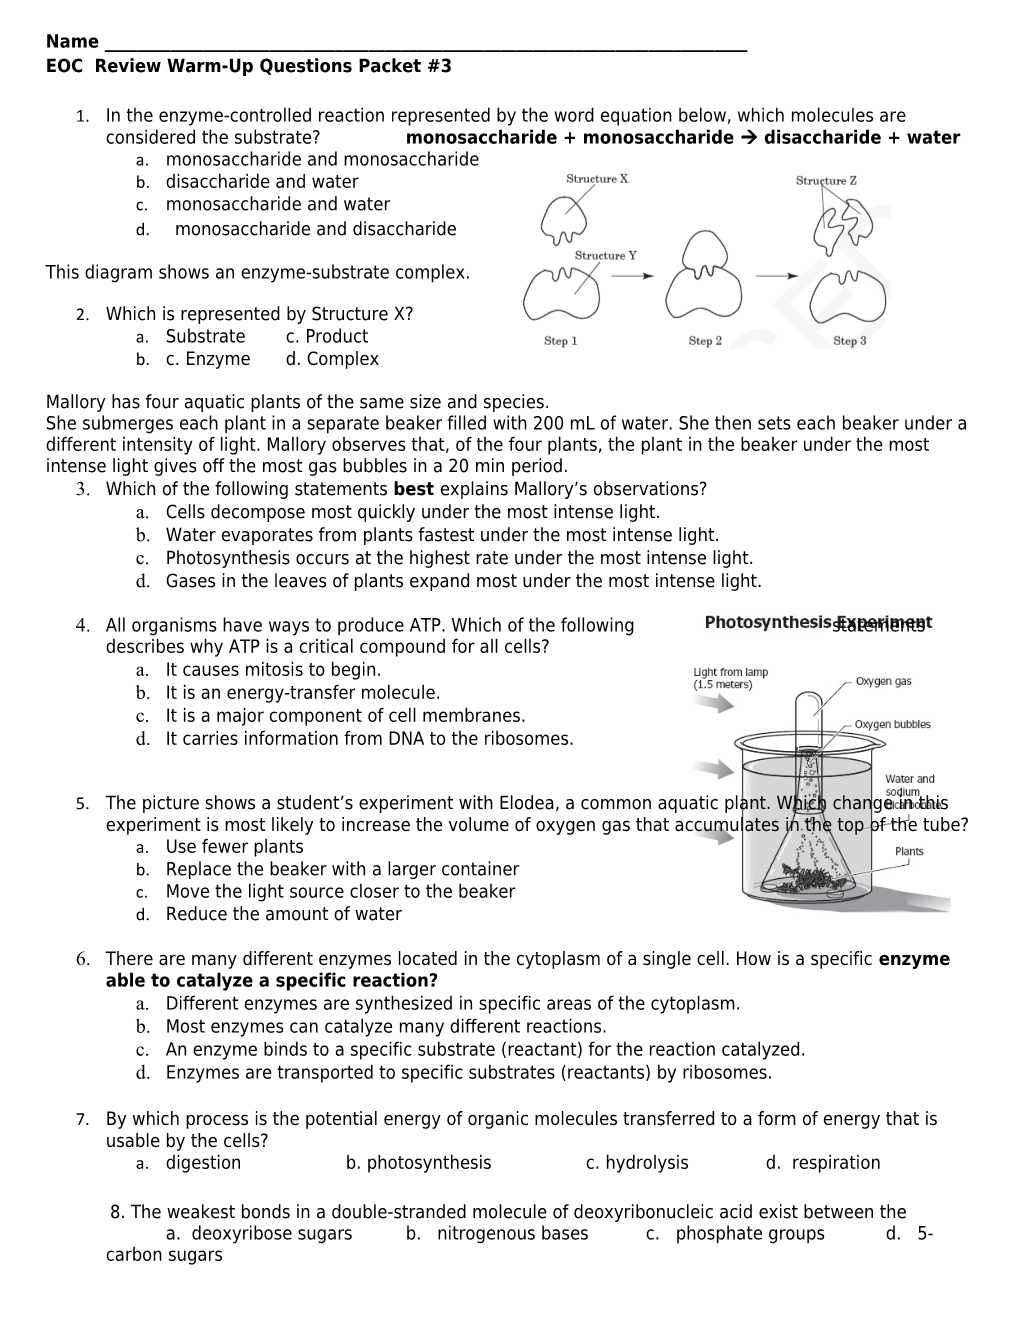 EOC Review Warm-Up Questions Packet #3